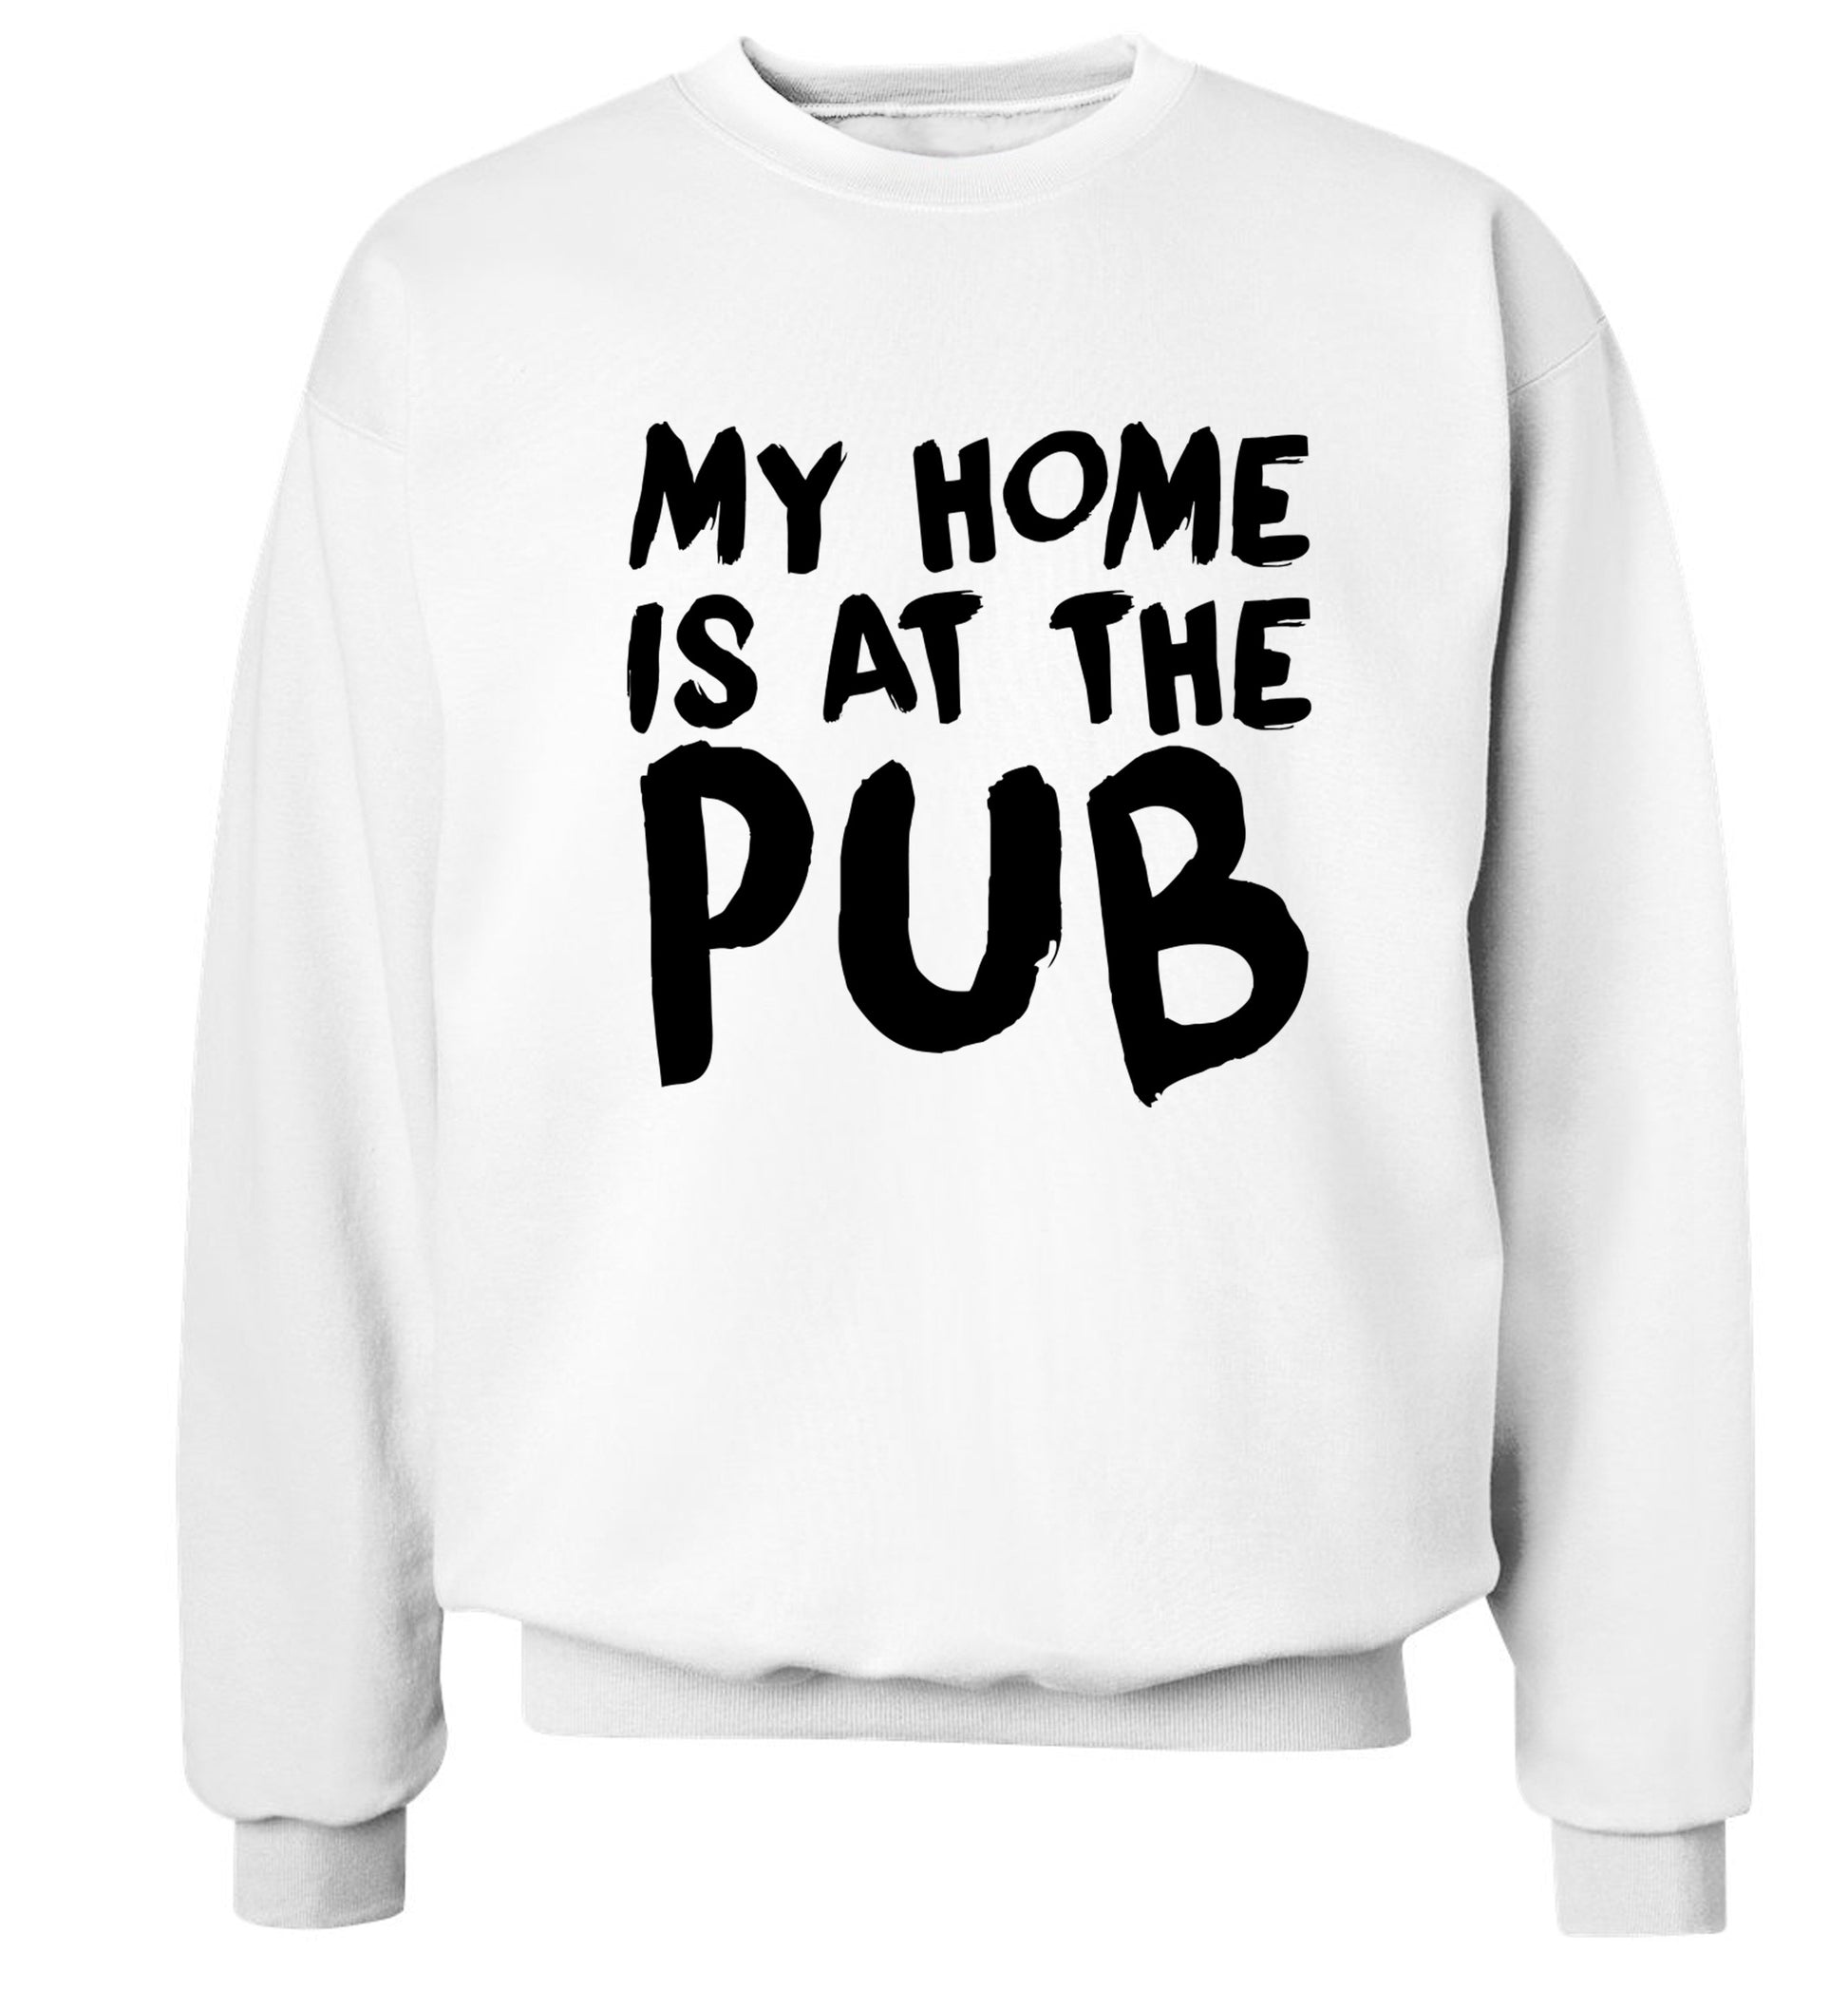 My home is at the pub Adult's unisex white Sweater 2XL